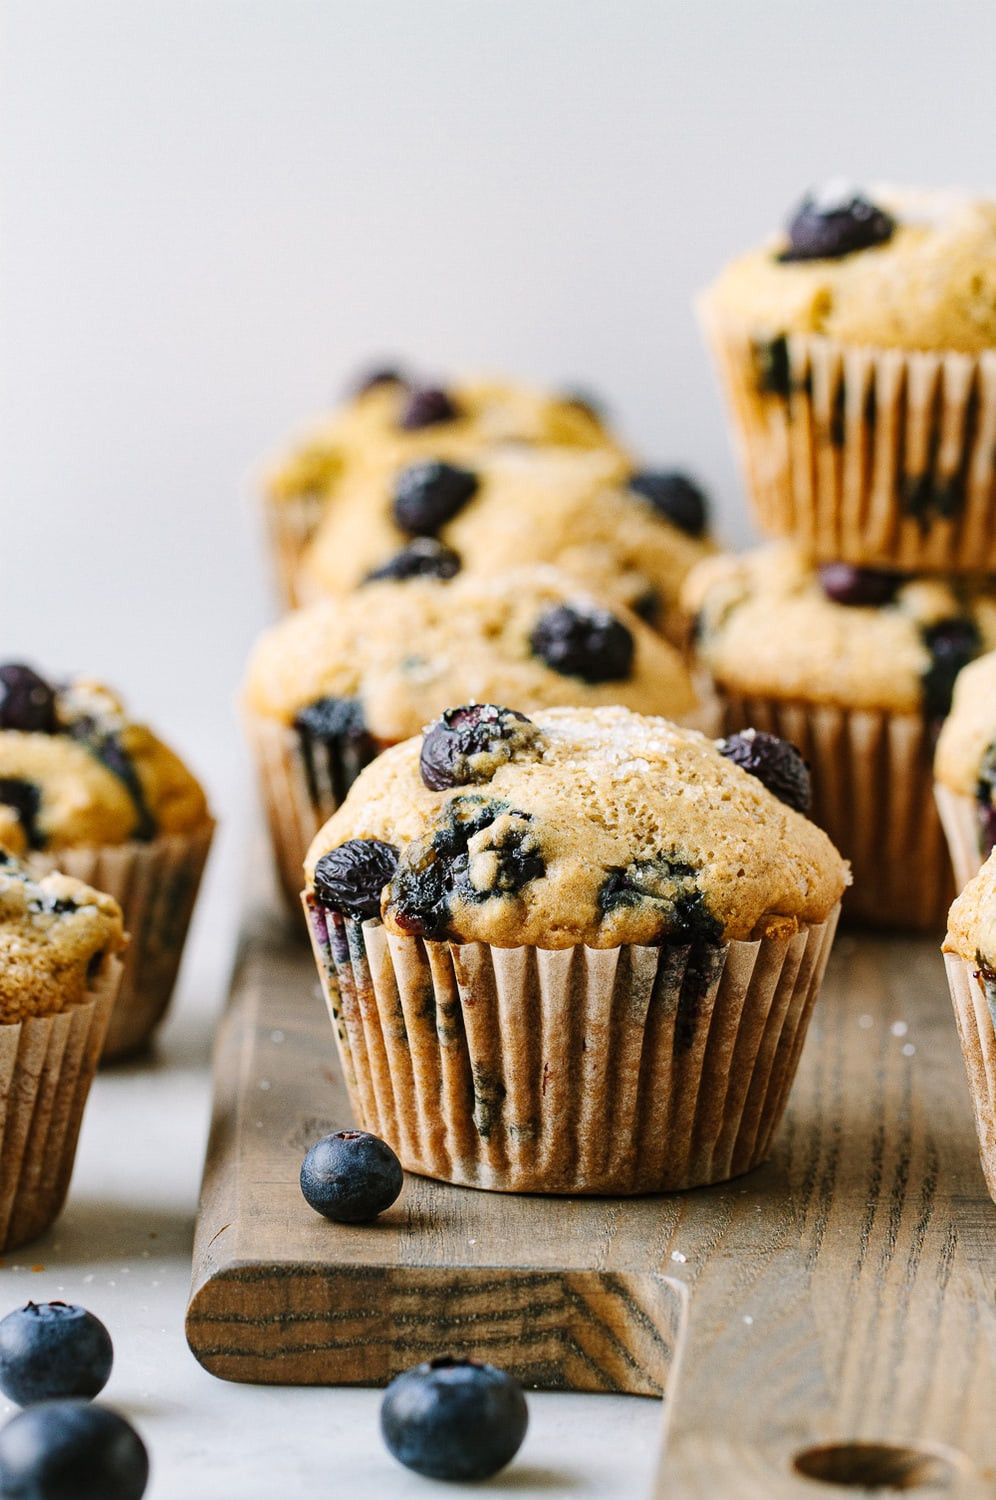 Easy Vegan Blueberry Muffins
 Vegan Blueberry Muffins Perfectly Light & Fluffy Muffin